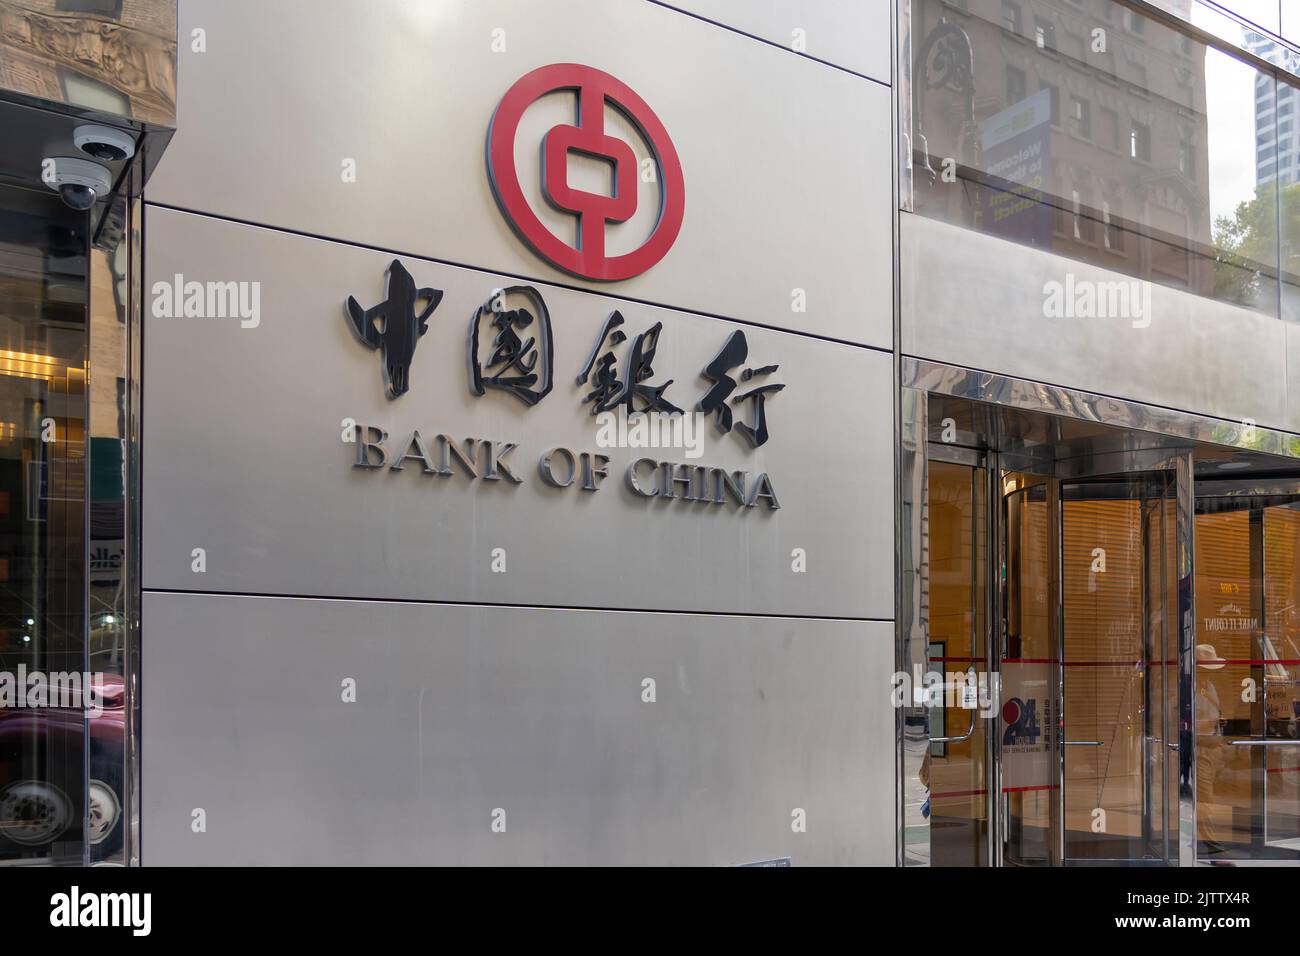 New York, NY, USA - August 17, 2022: The Bank of China sign at its branch in New York, NY, USA, August 17, 2022. Stock Photo